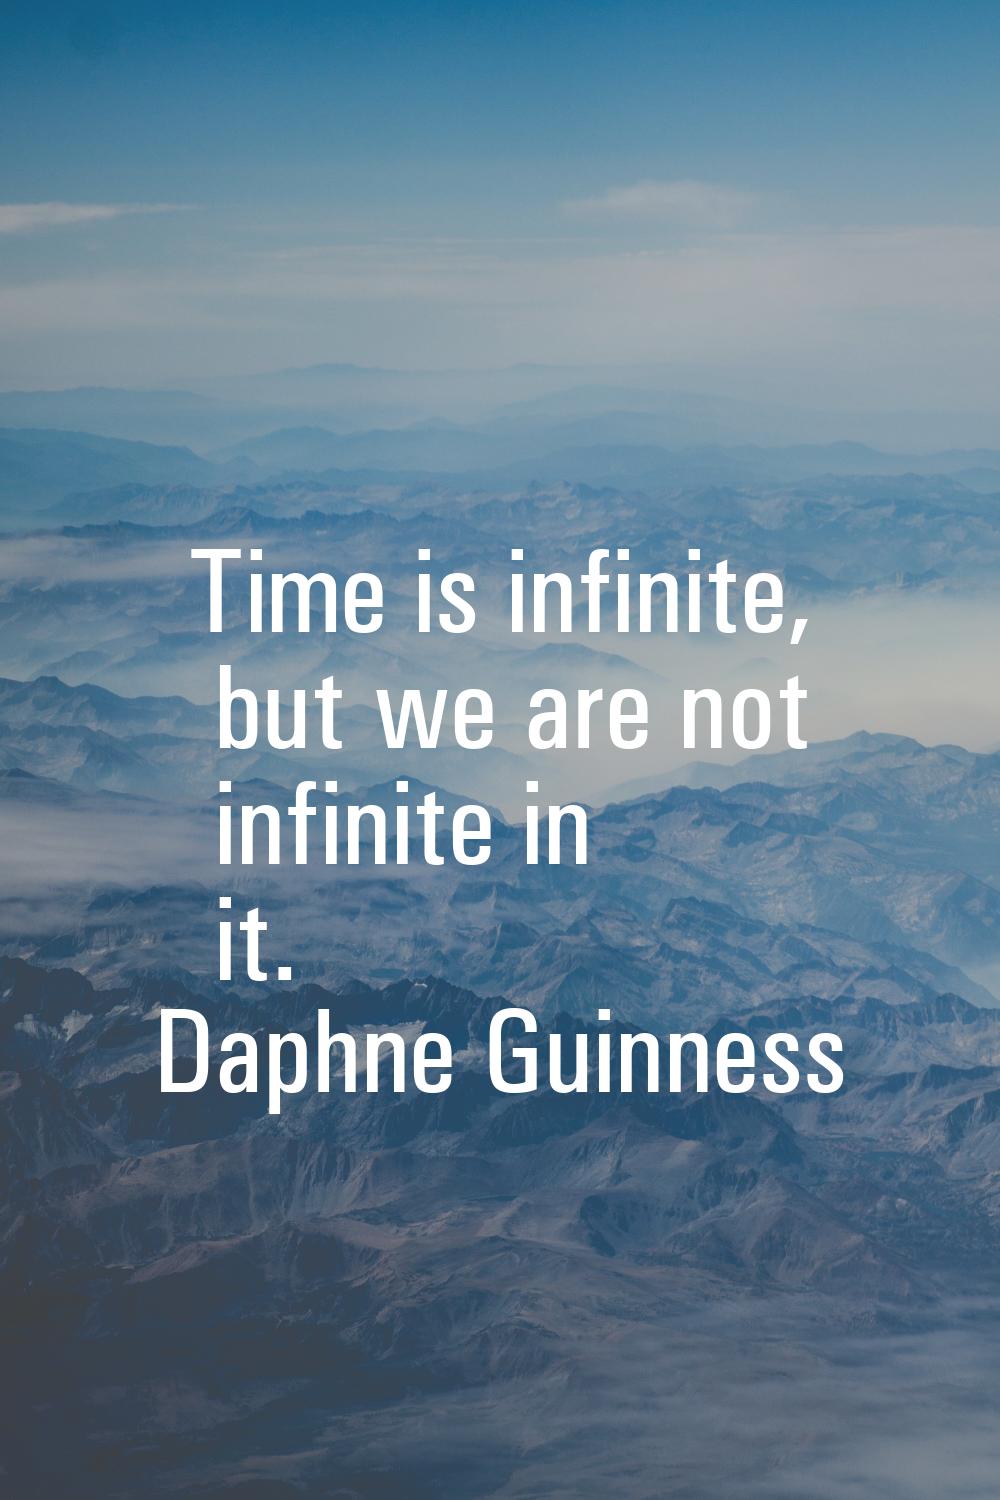 Time is infinite, but we are not infinite in it.